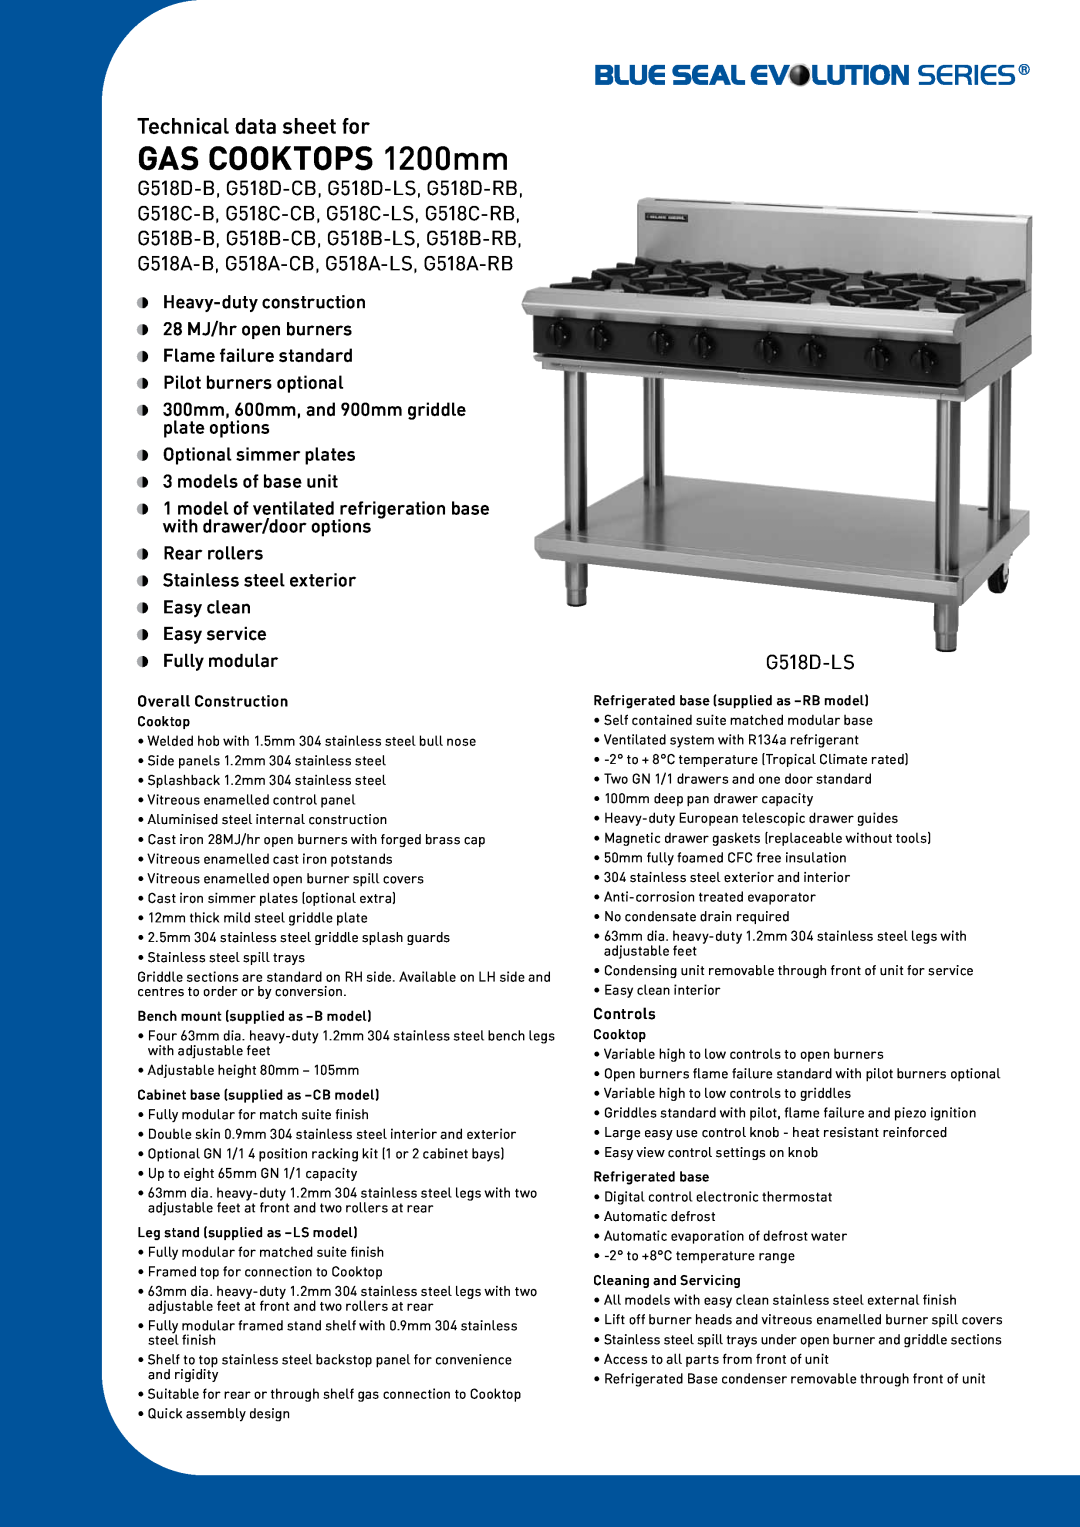 Blue Sea Systems G518D-CB manual GAS COOKTOPS 1200mm, Technical data sheet for, Overall Construction, Controls, G518D-LS 